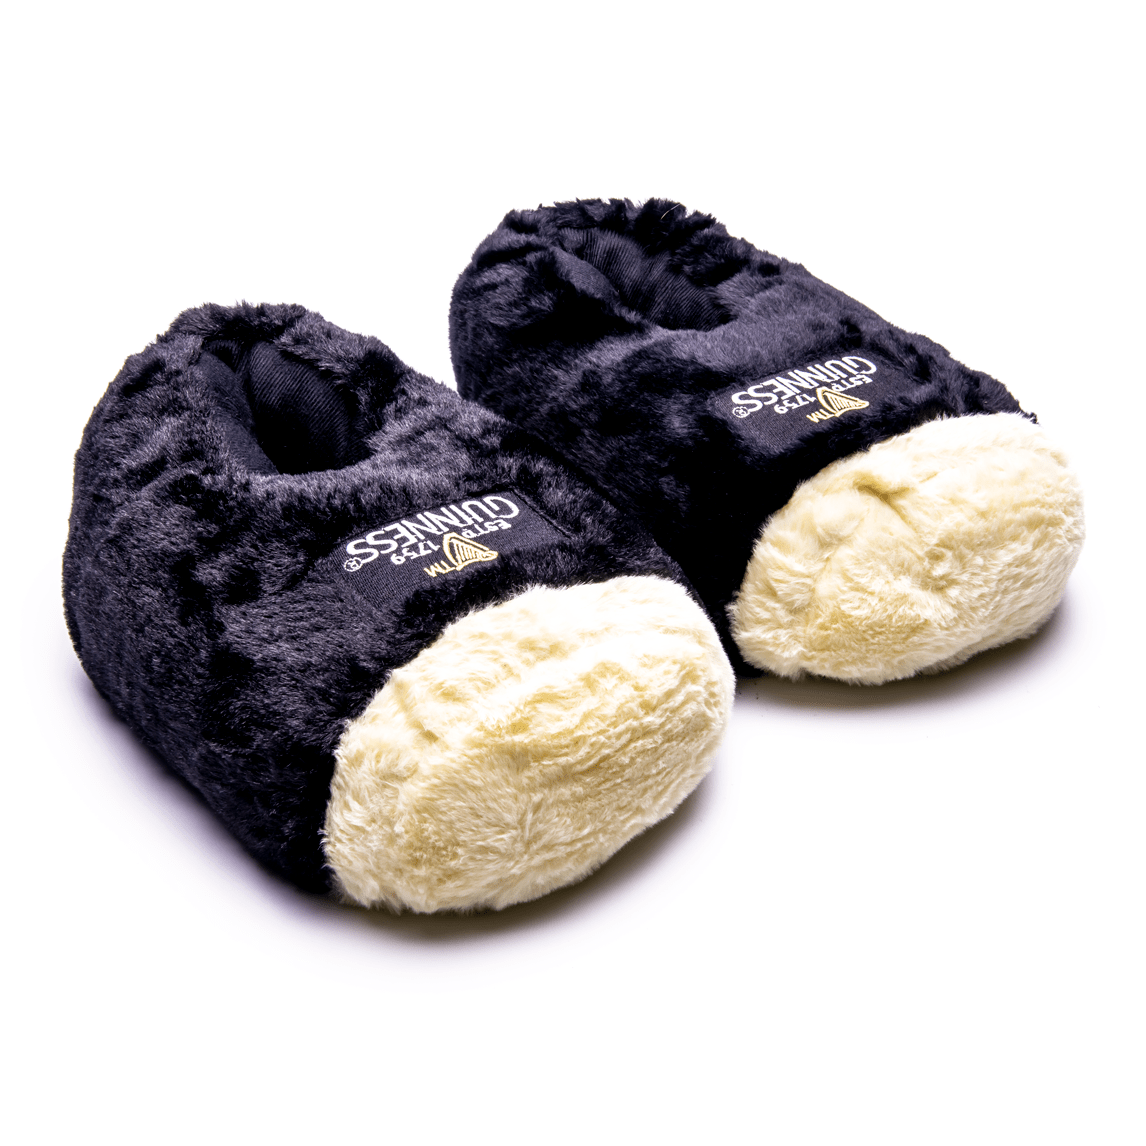 A pair of Guinness® Pint Slippers on a white background.